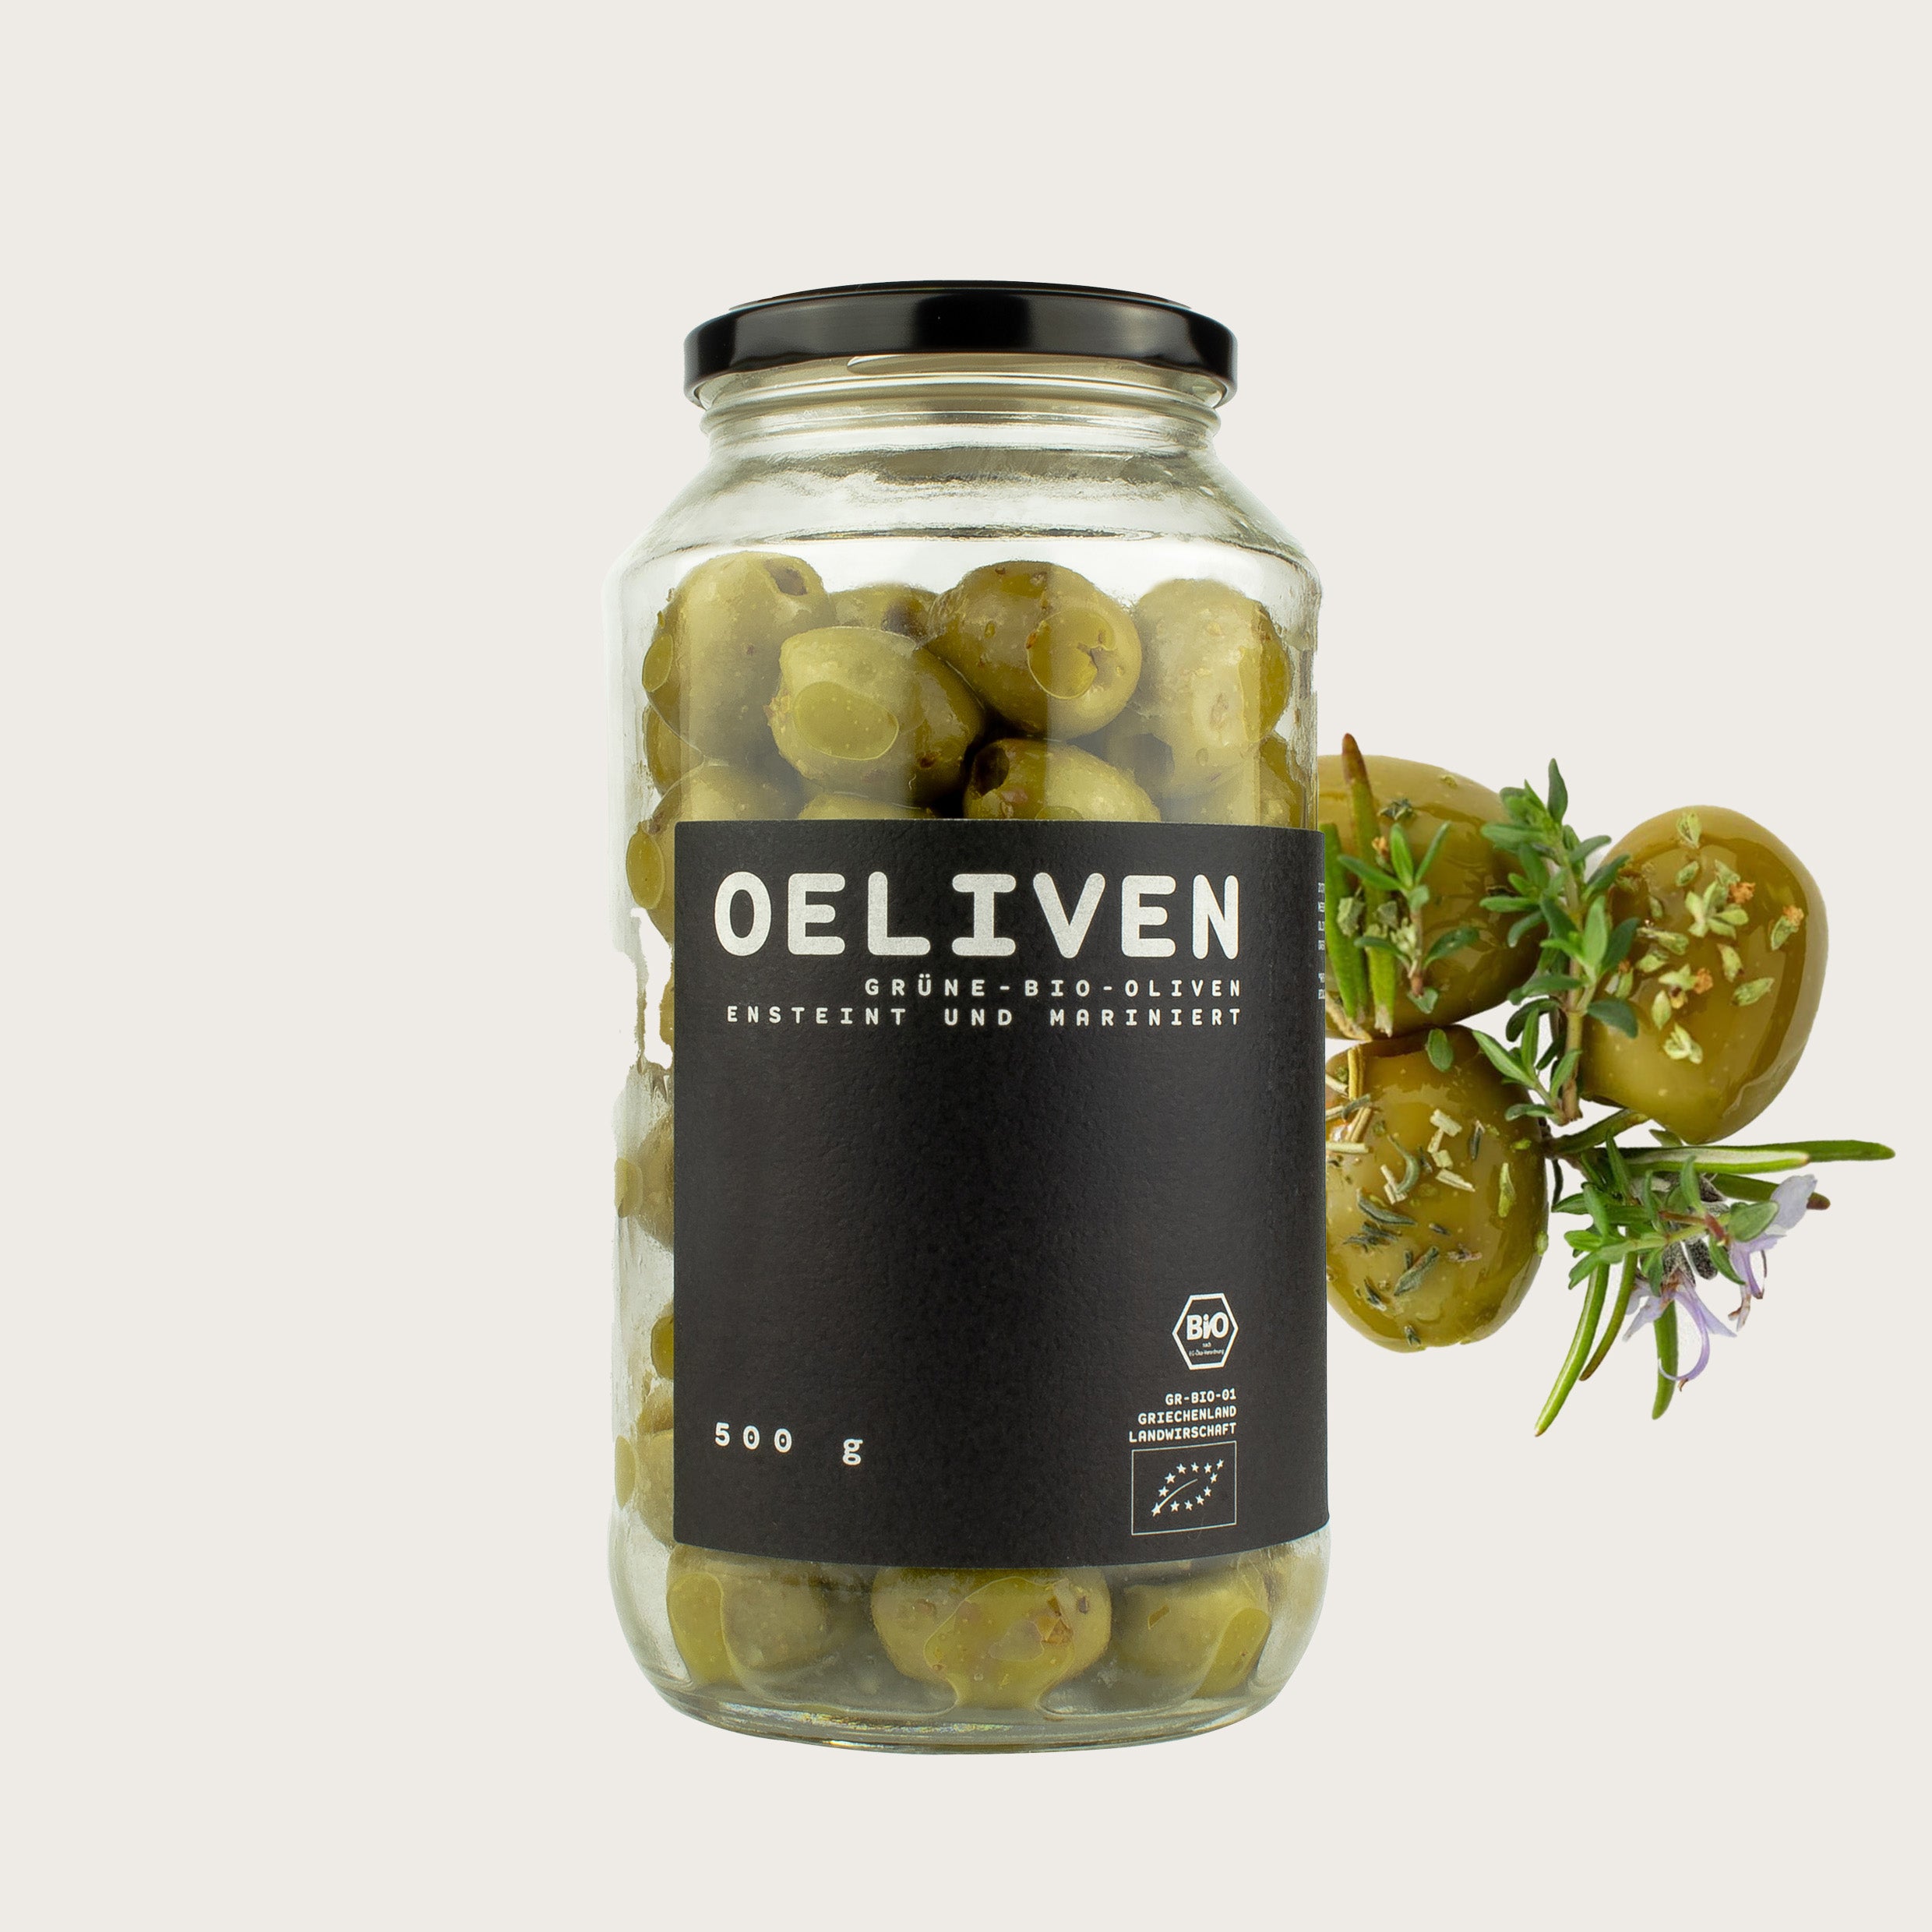 OELiven Green 500 g - Green organic olives with herbs